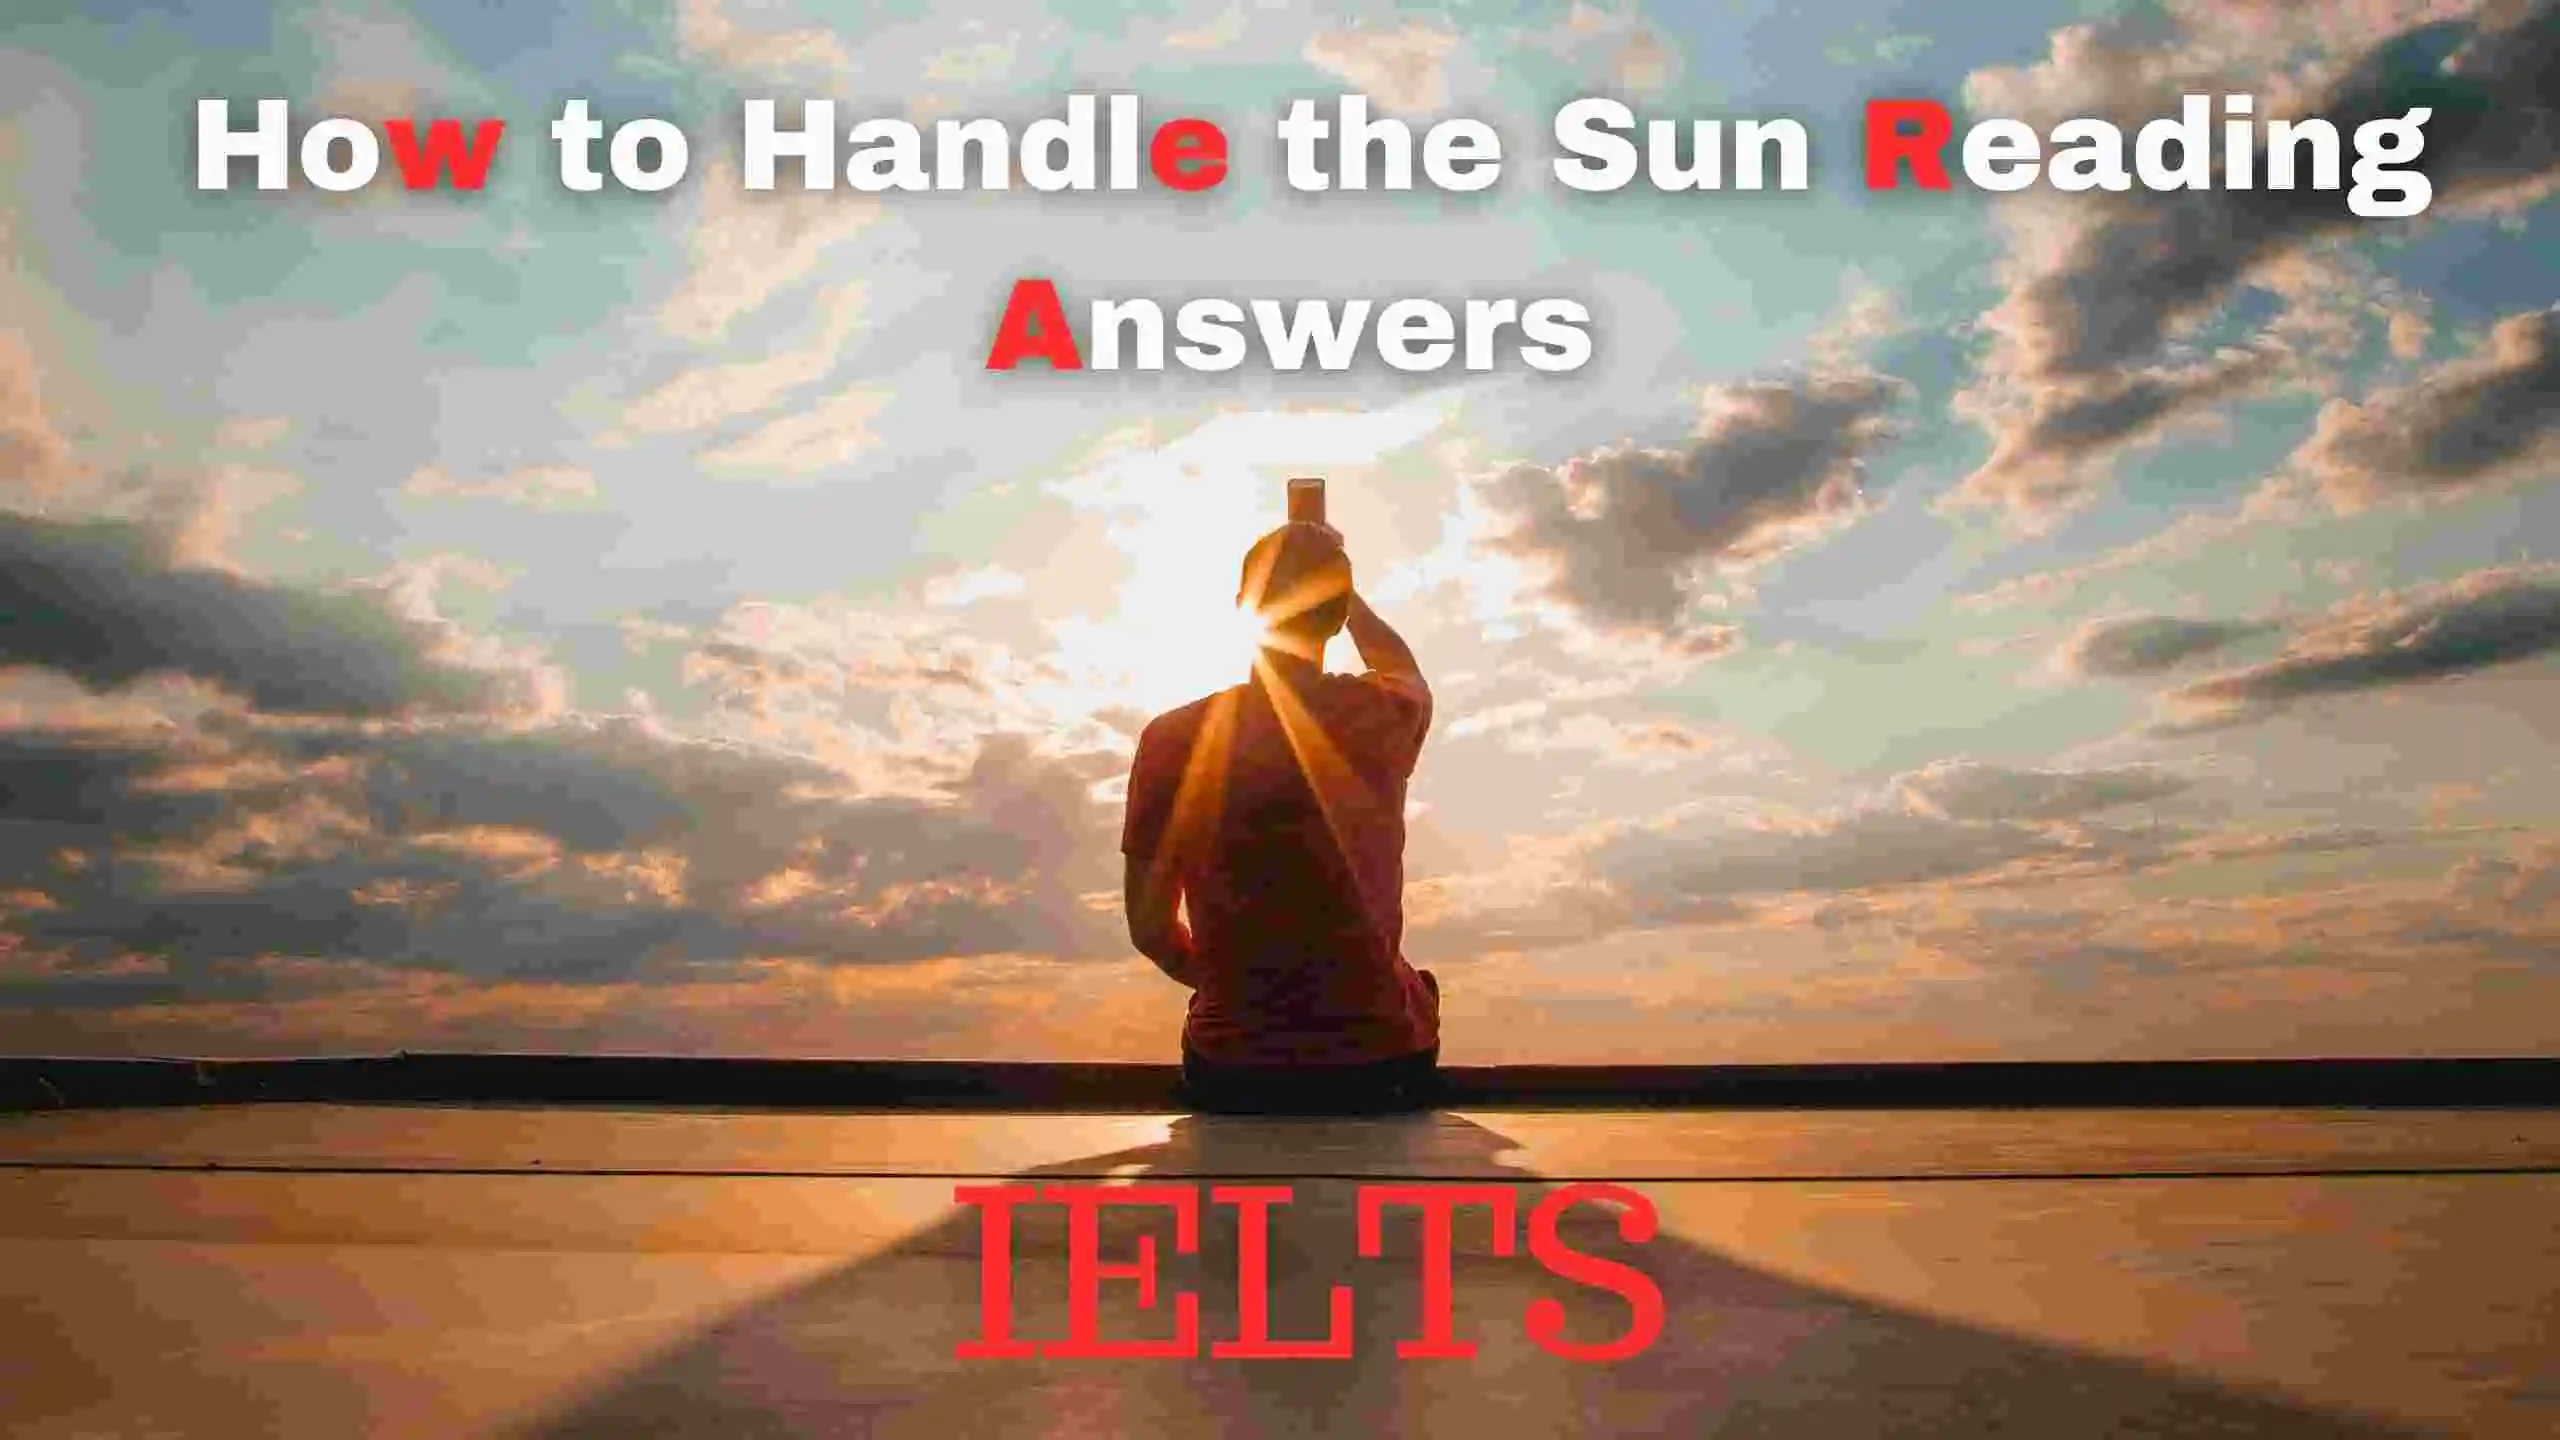 How to Handle the Sun Reading Answers?